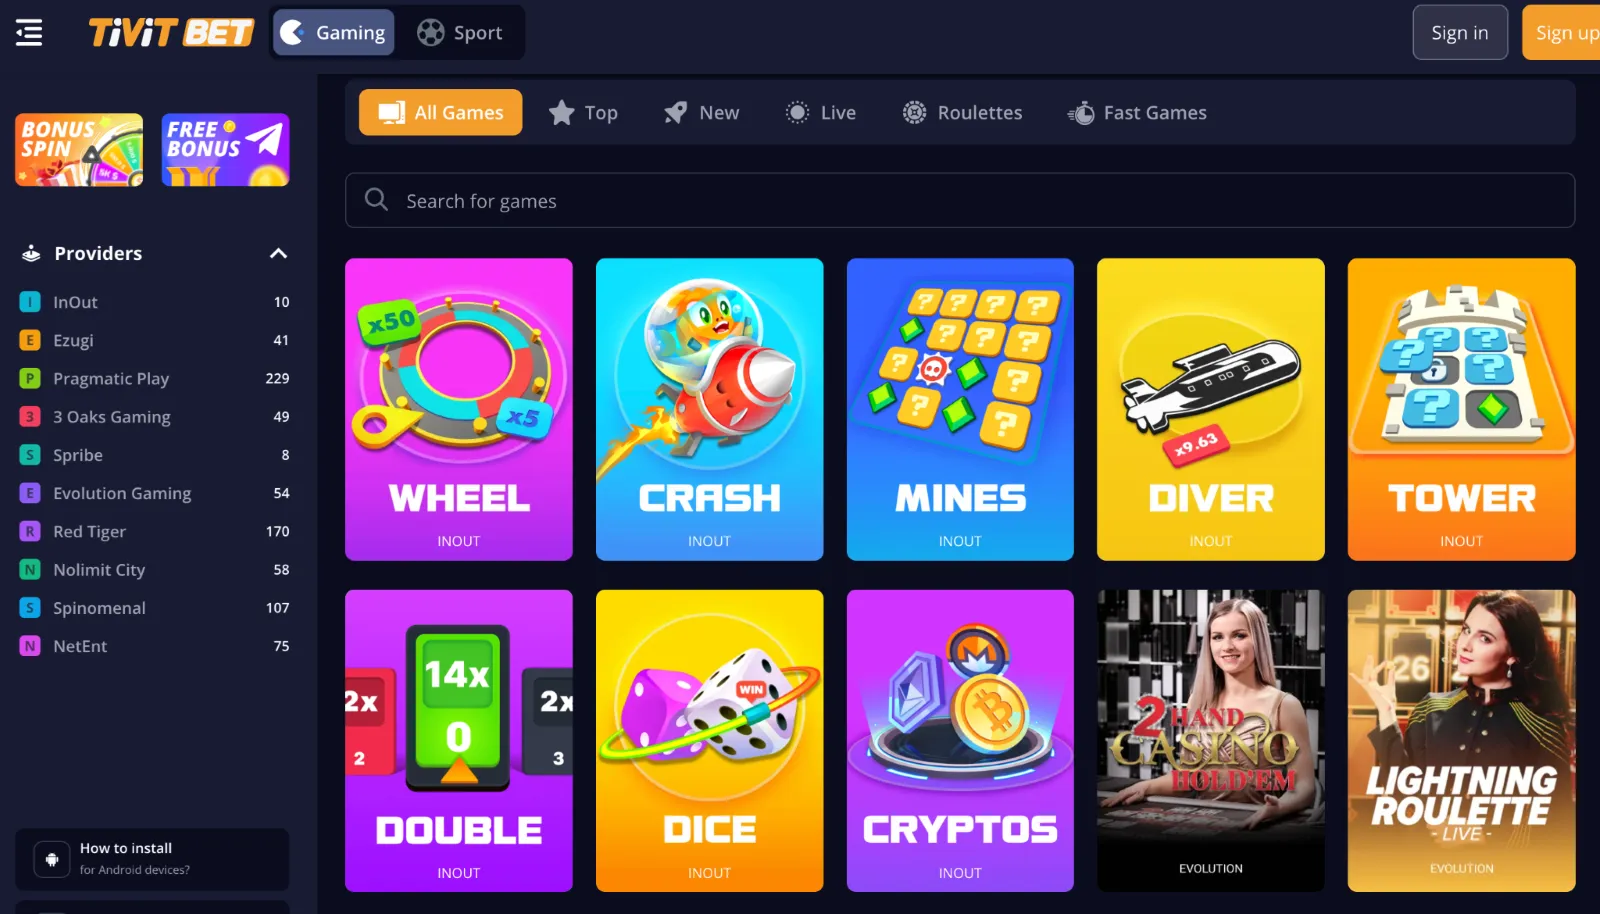 Tivitbet available games 